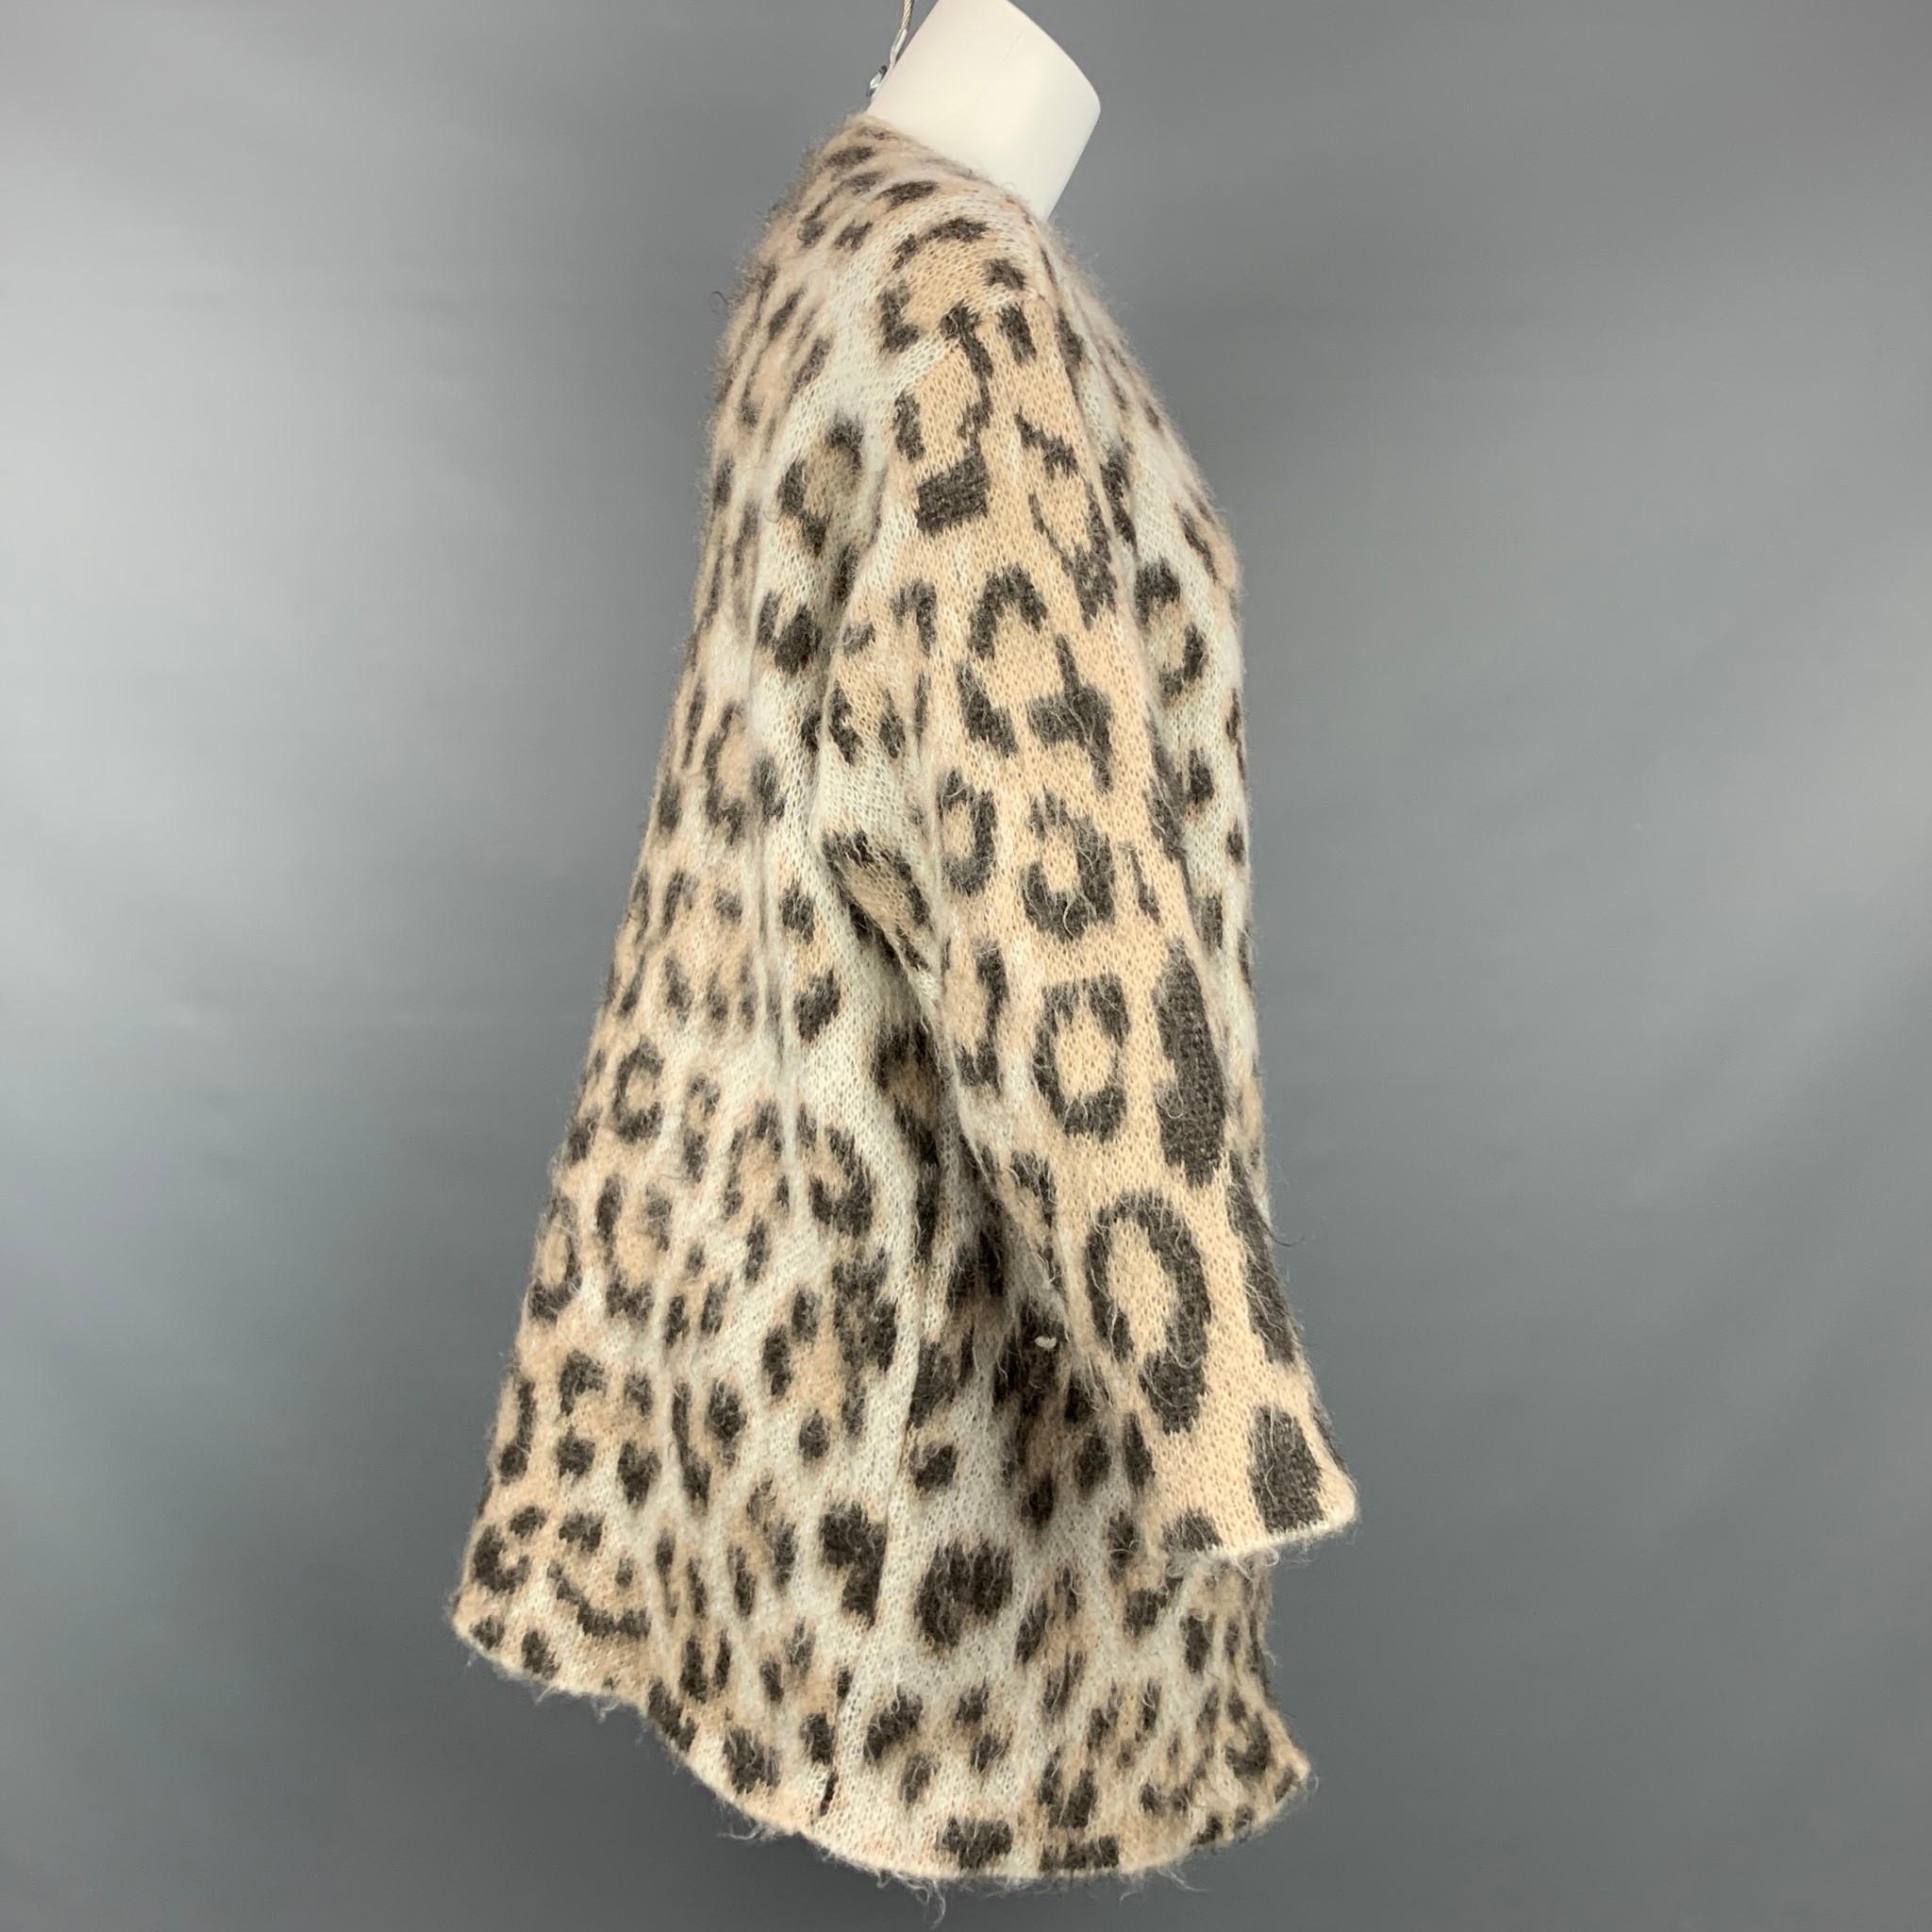 LOEWE cardigan comes in a taupe leopard print mohair blend featuring a oversized fit, slit pockets, and a buttoned closure. Made in Italy.

Very Good Pre-Owned Condition.
Marked: XS
Original Retail Price: $1,330.00

Measurements:

Shoulder: 19